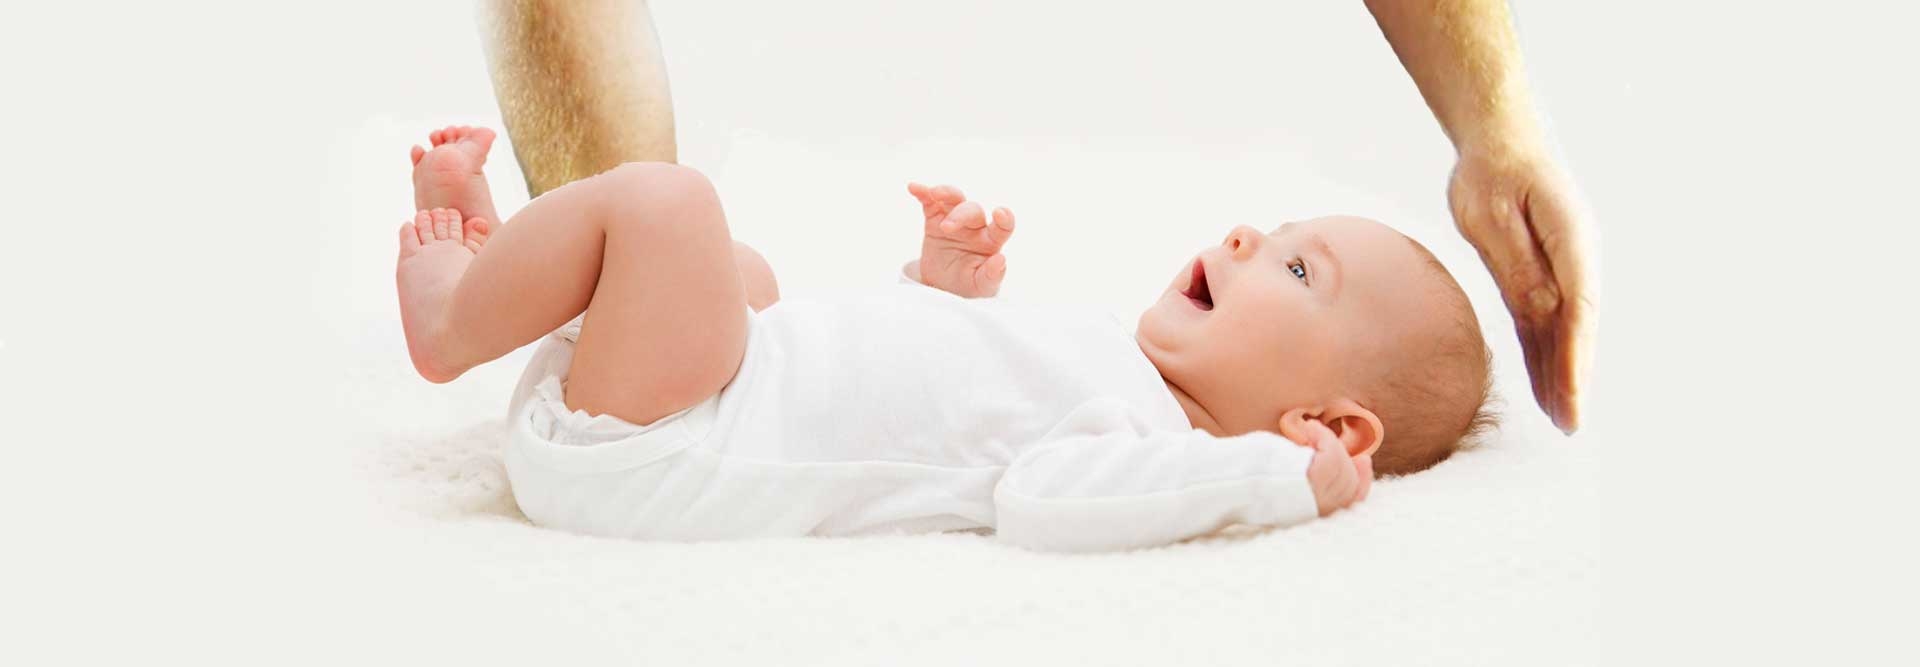 Bio Energy Therapy for Babies affected by shock or trauma - Energy healing therapy